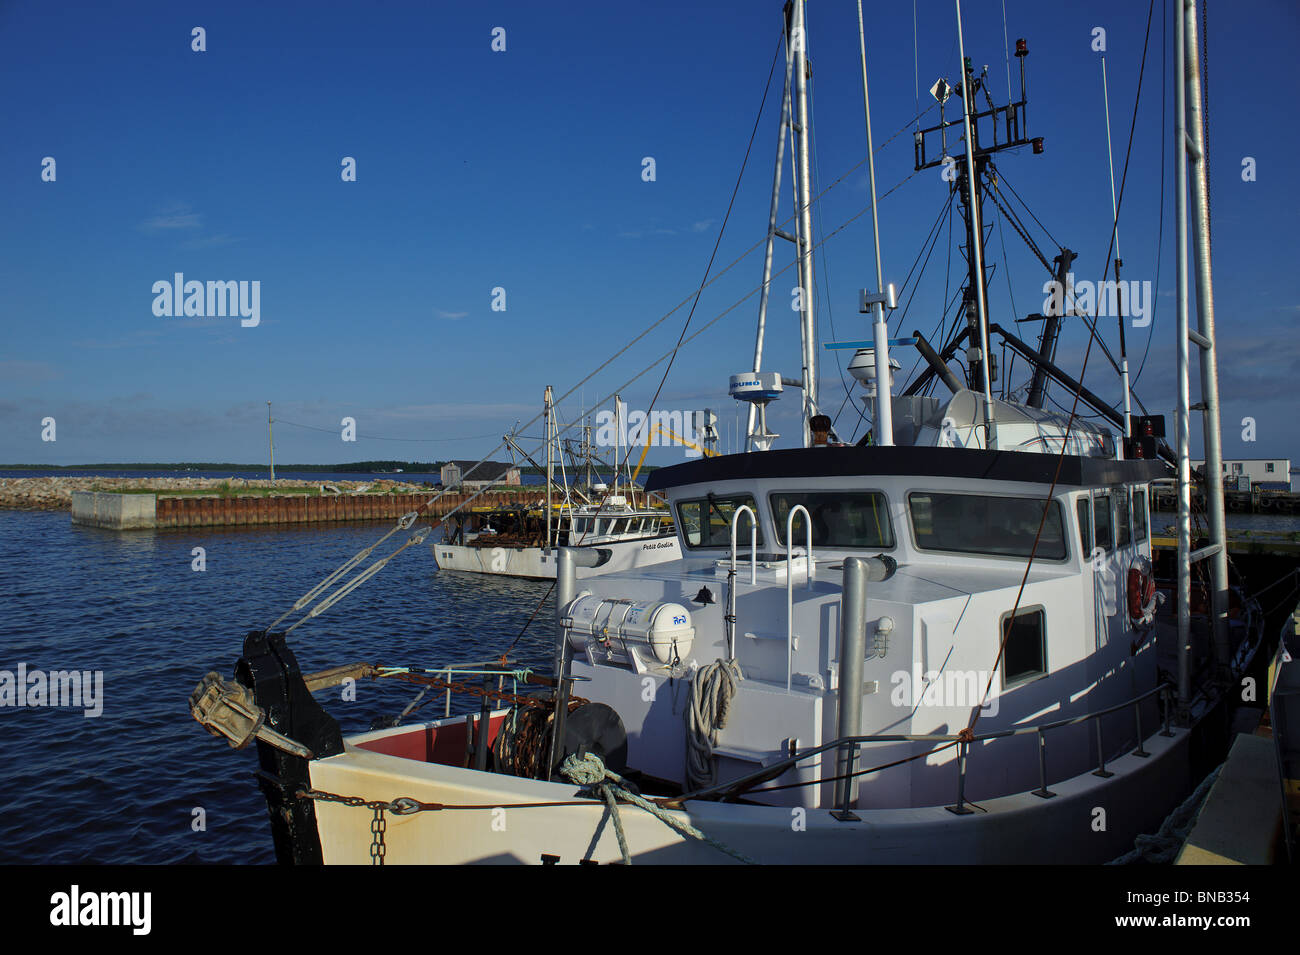 Lameque wharf or dock with deep sea fishing boats tied up New Brunswick Stock Photo